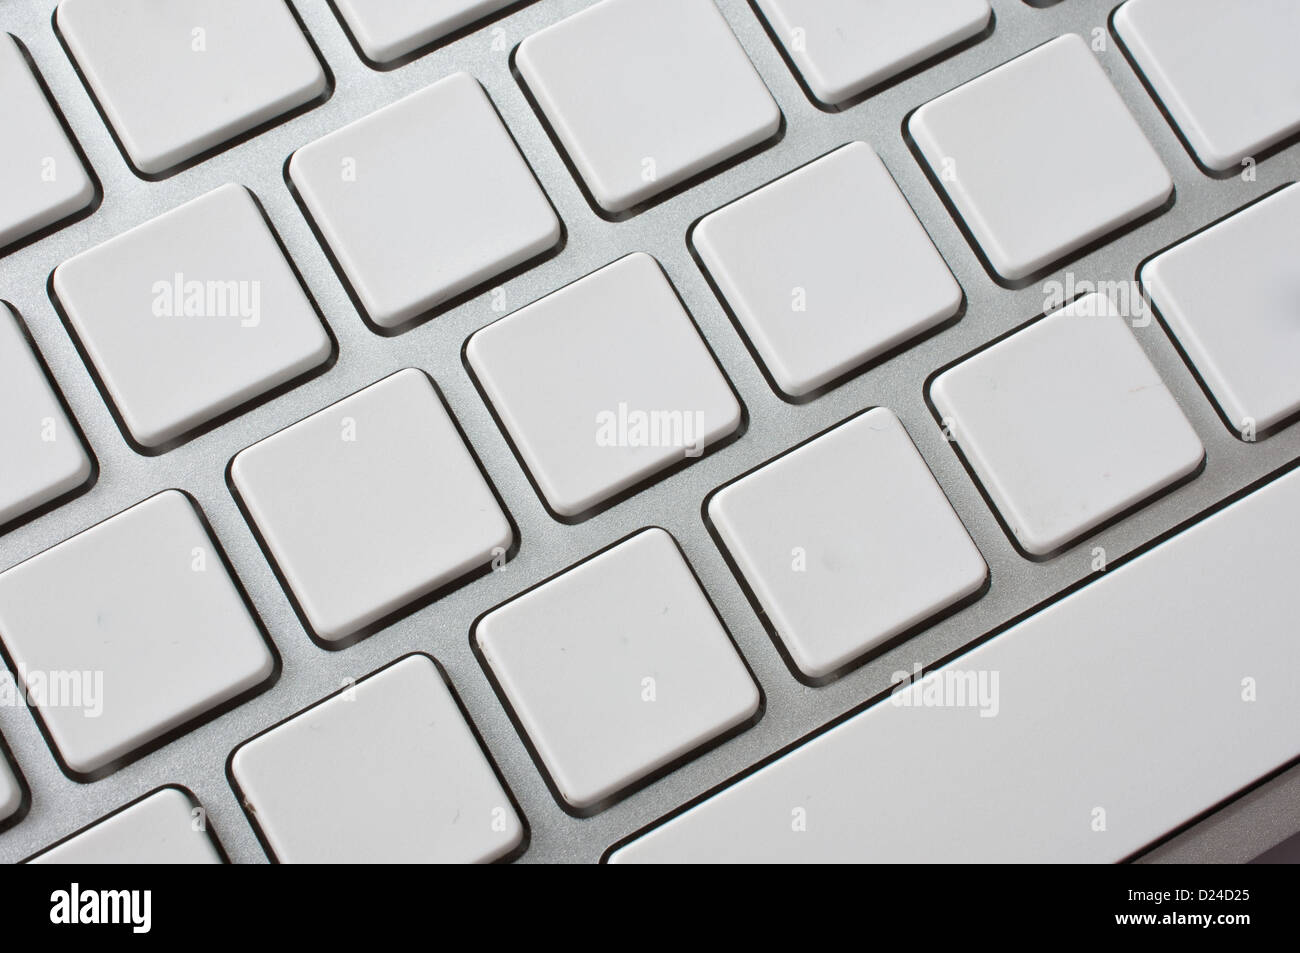 Close up image of a modern stylish aluminium white computer keyboard with blank keys for your own idea. Stock Photo